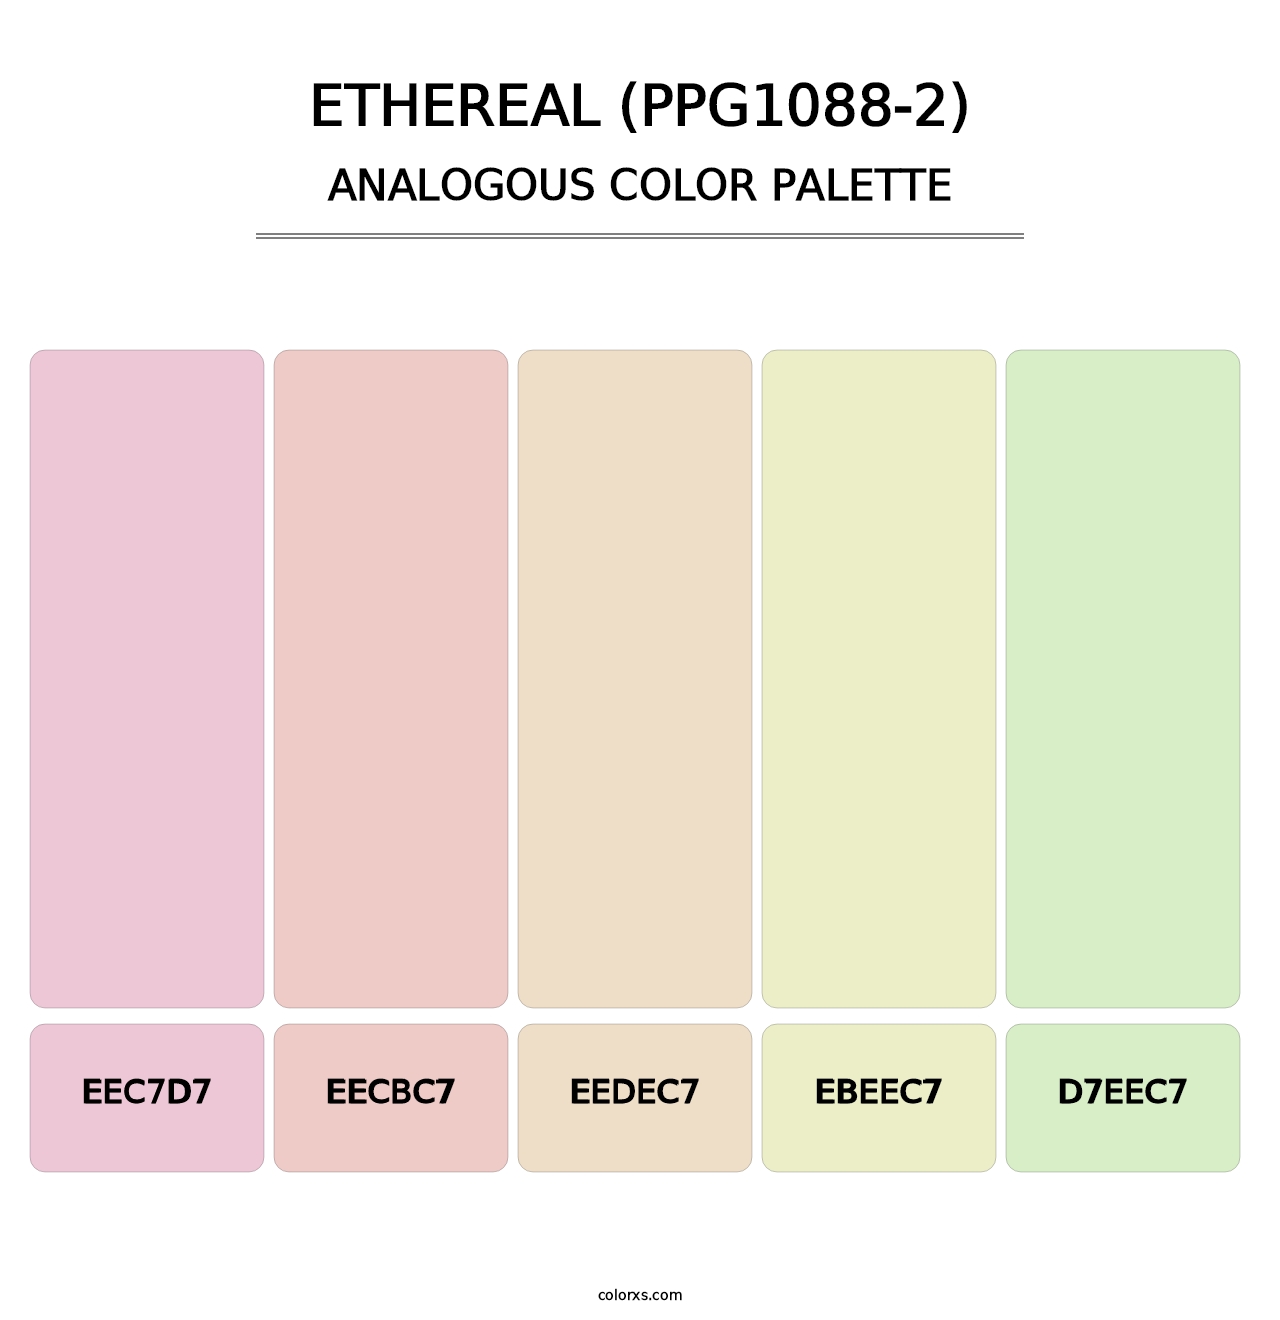 Ethereal (PPG1088-2) - Analogous Color Palette